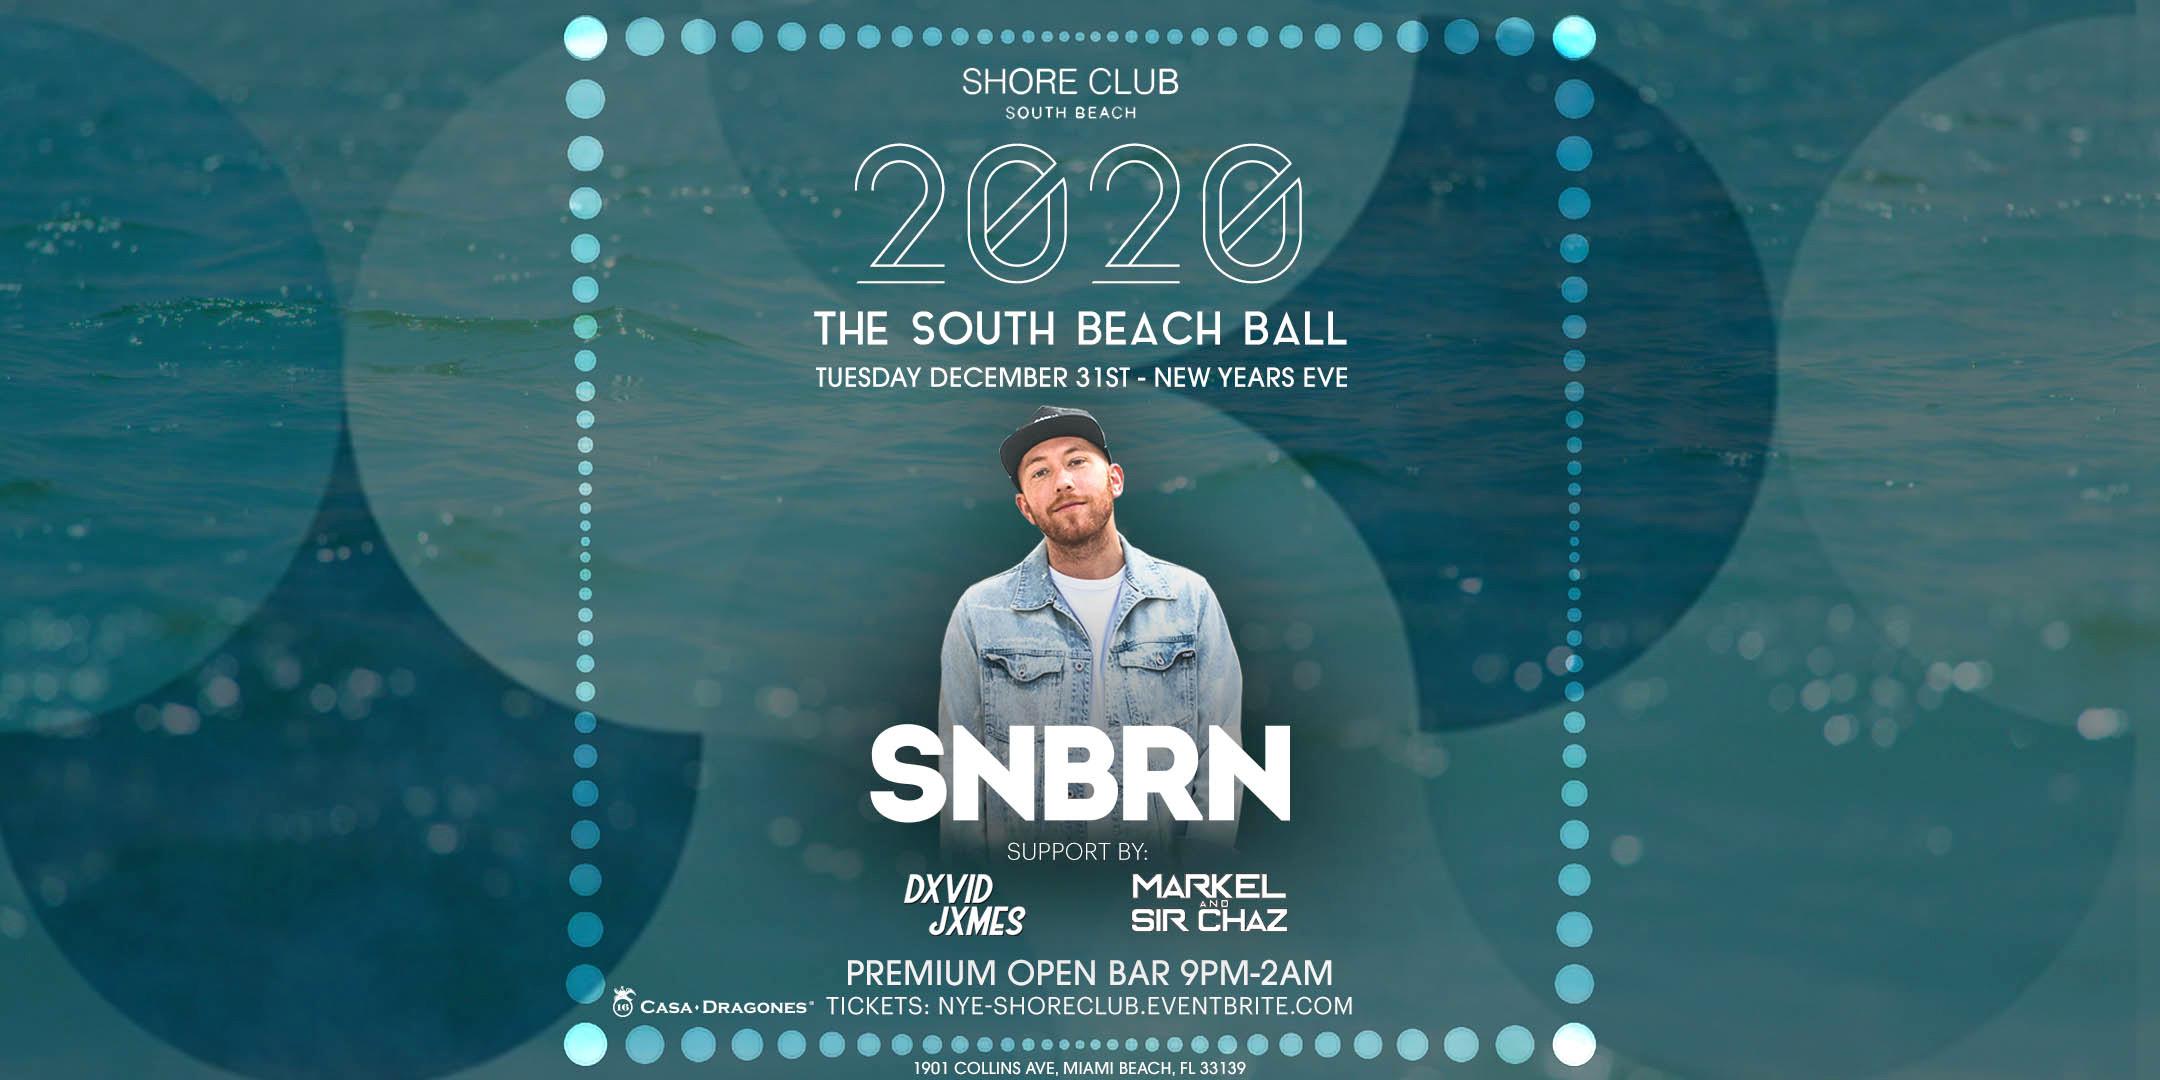 SNBRN at Shore Club Miami New Year's Eve 2020